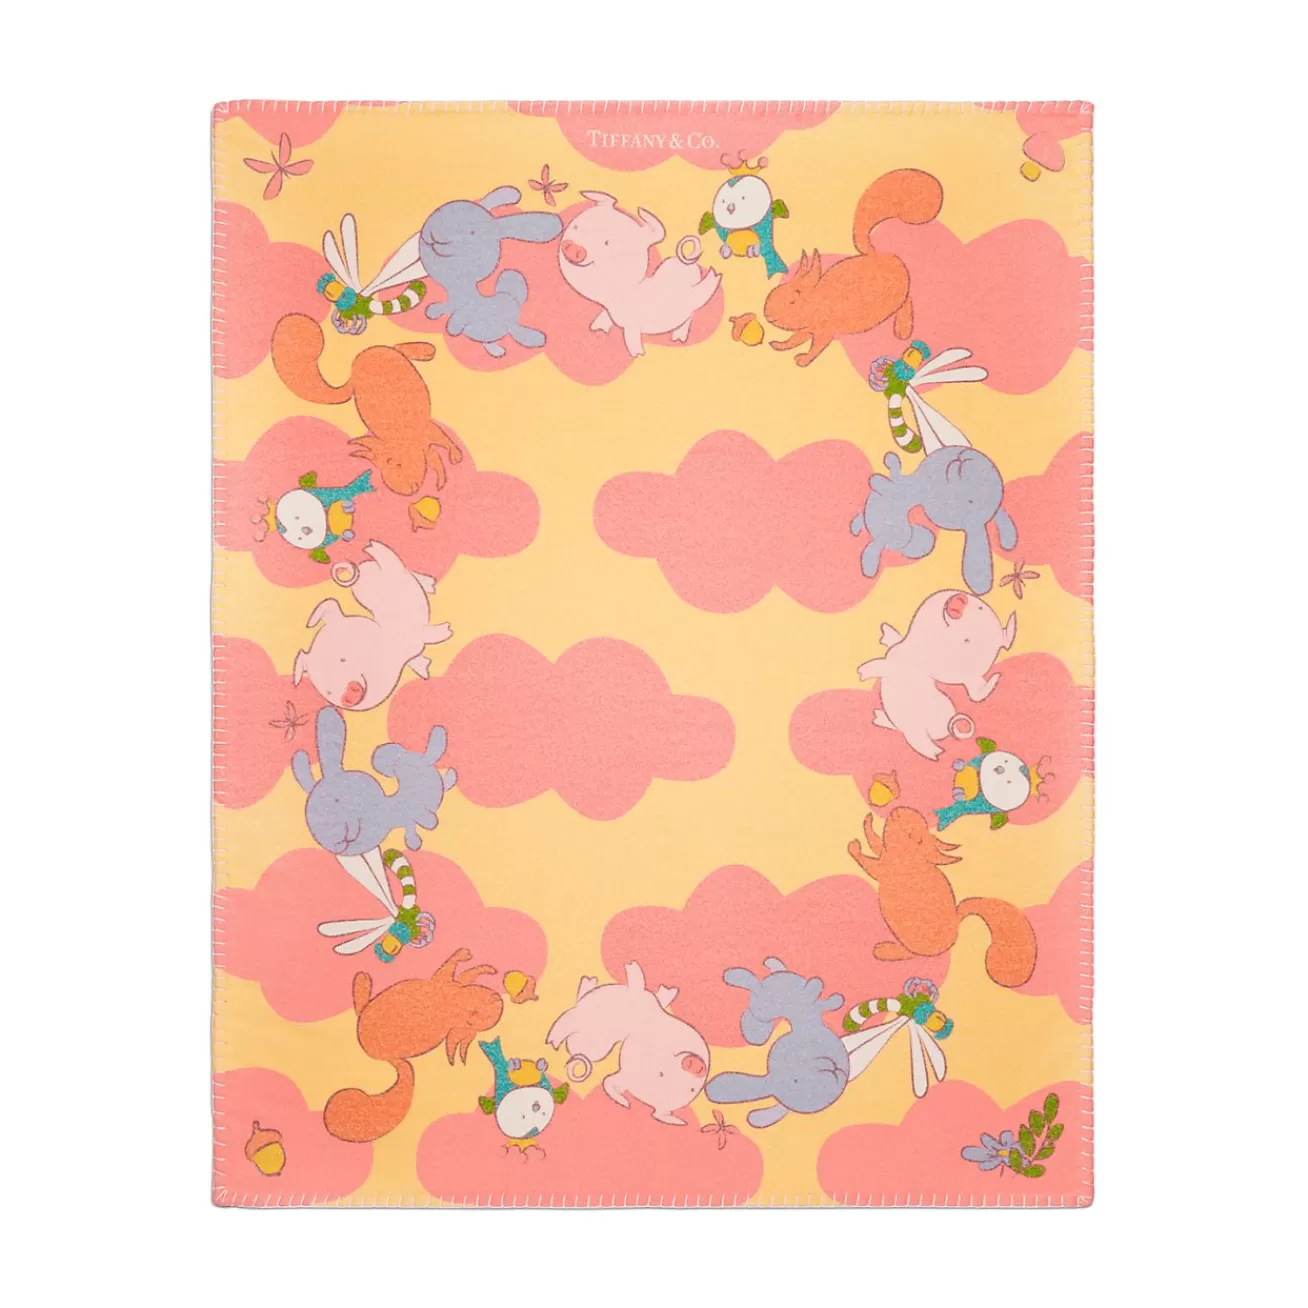 Tiffany & Co. Tiny Tiffany Land Animals Blanket in a Wool Blend | ^ Baby | Baby